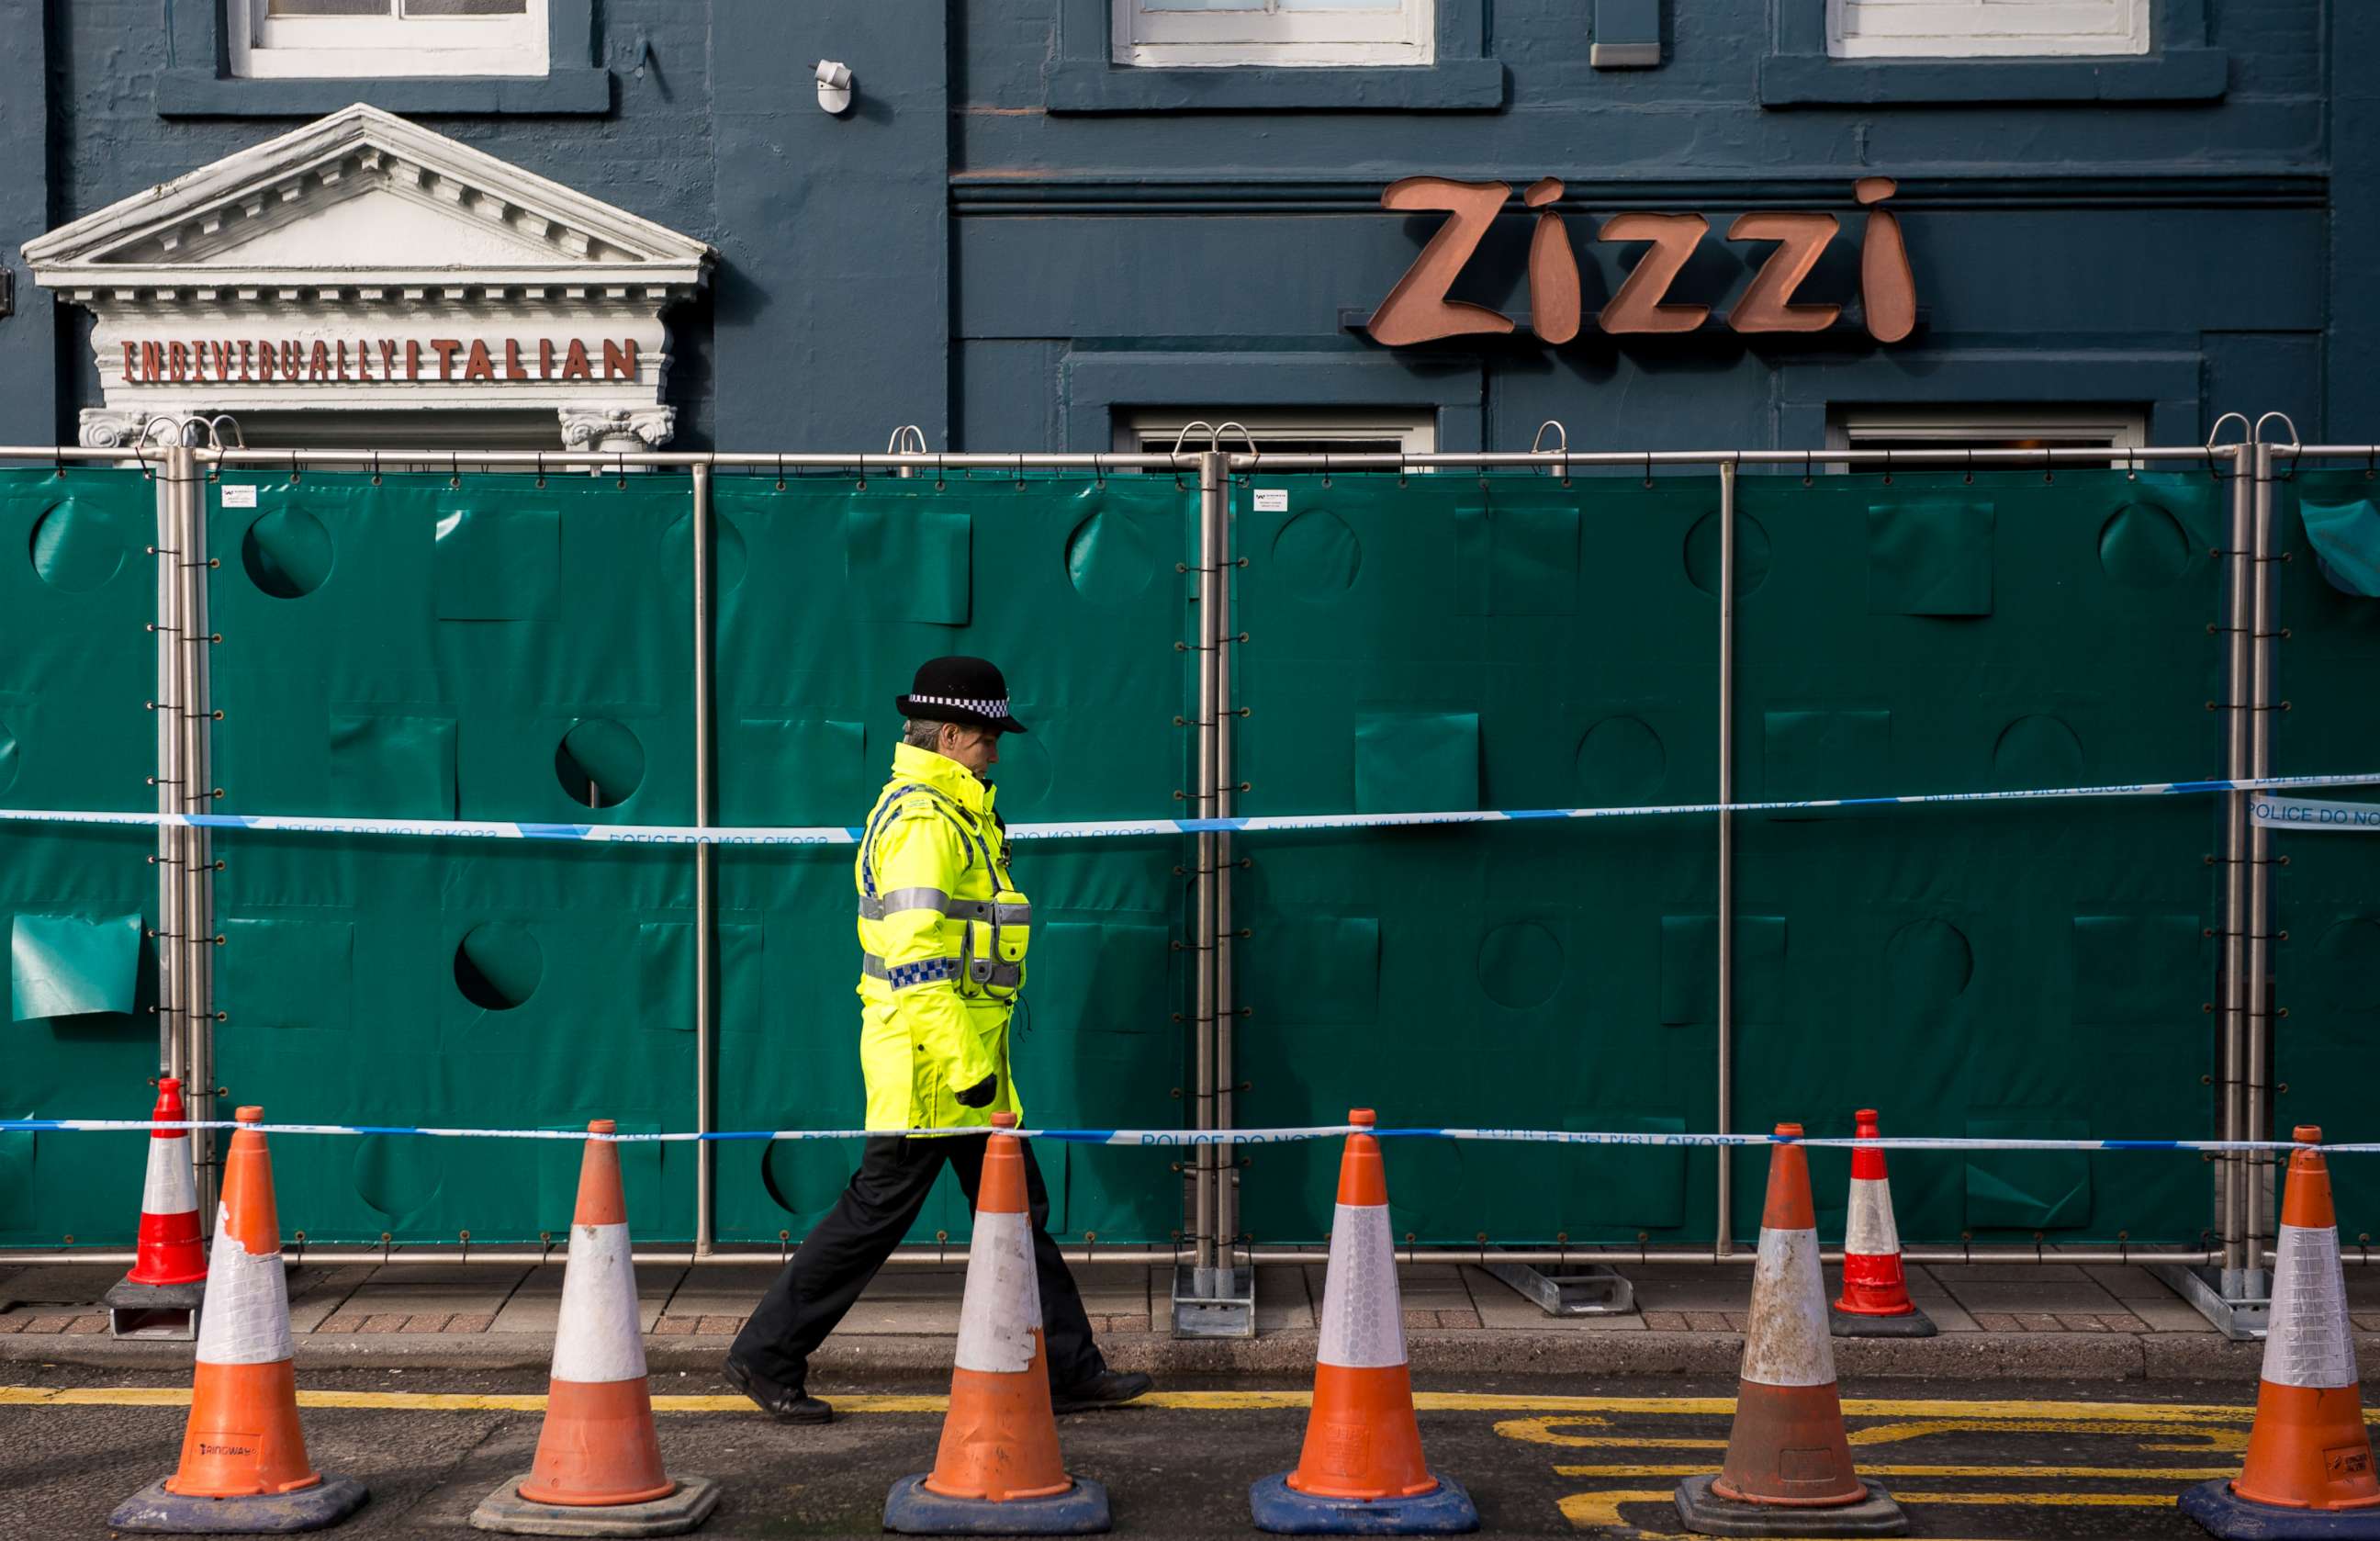 PHOTO: Police officers stand outside Zizzi restaurant as it remains closed as investigations continue into the poisoning of Sergei Skripal on March 11, 2018 in Salisbury, England.